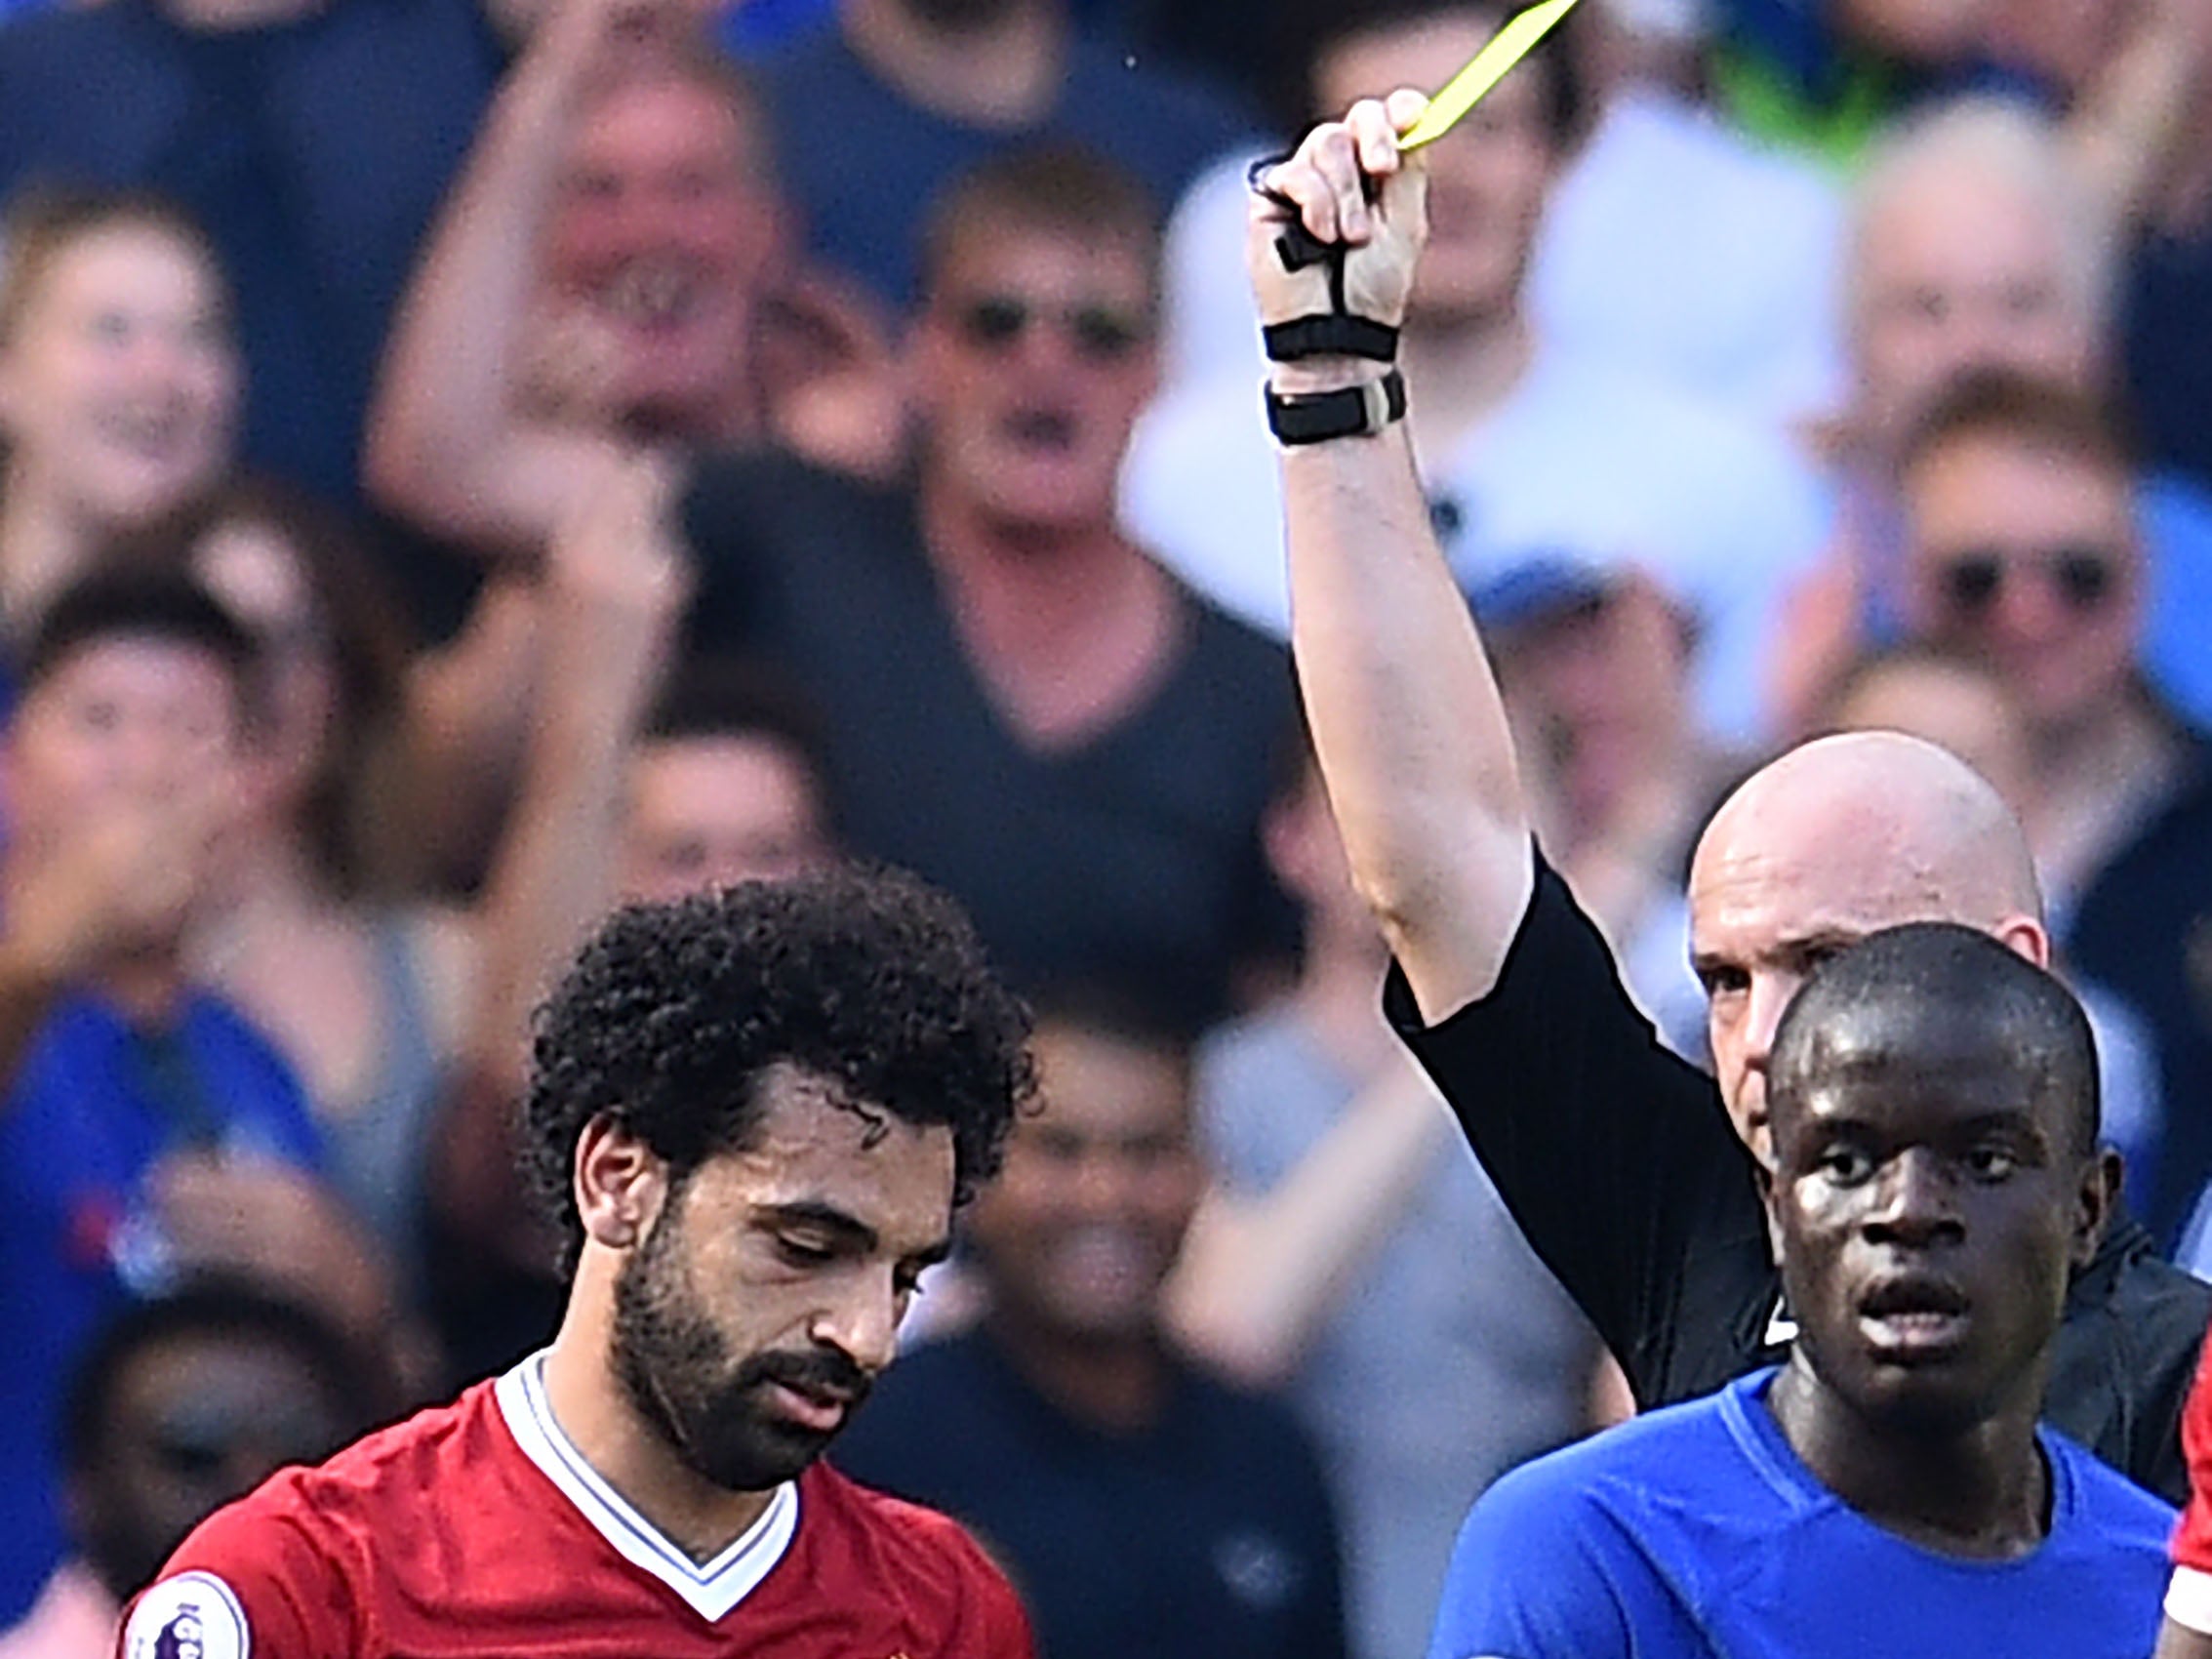 Mohamed Salah was booked in the first half